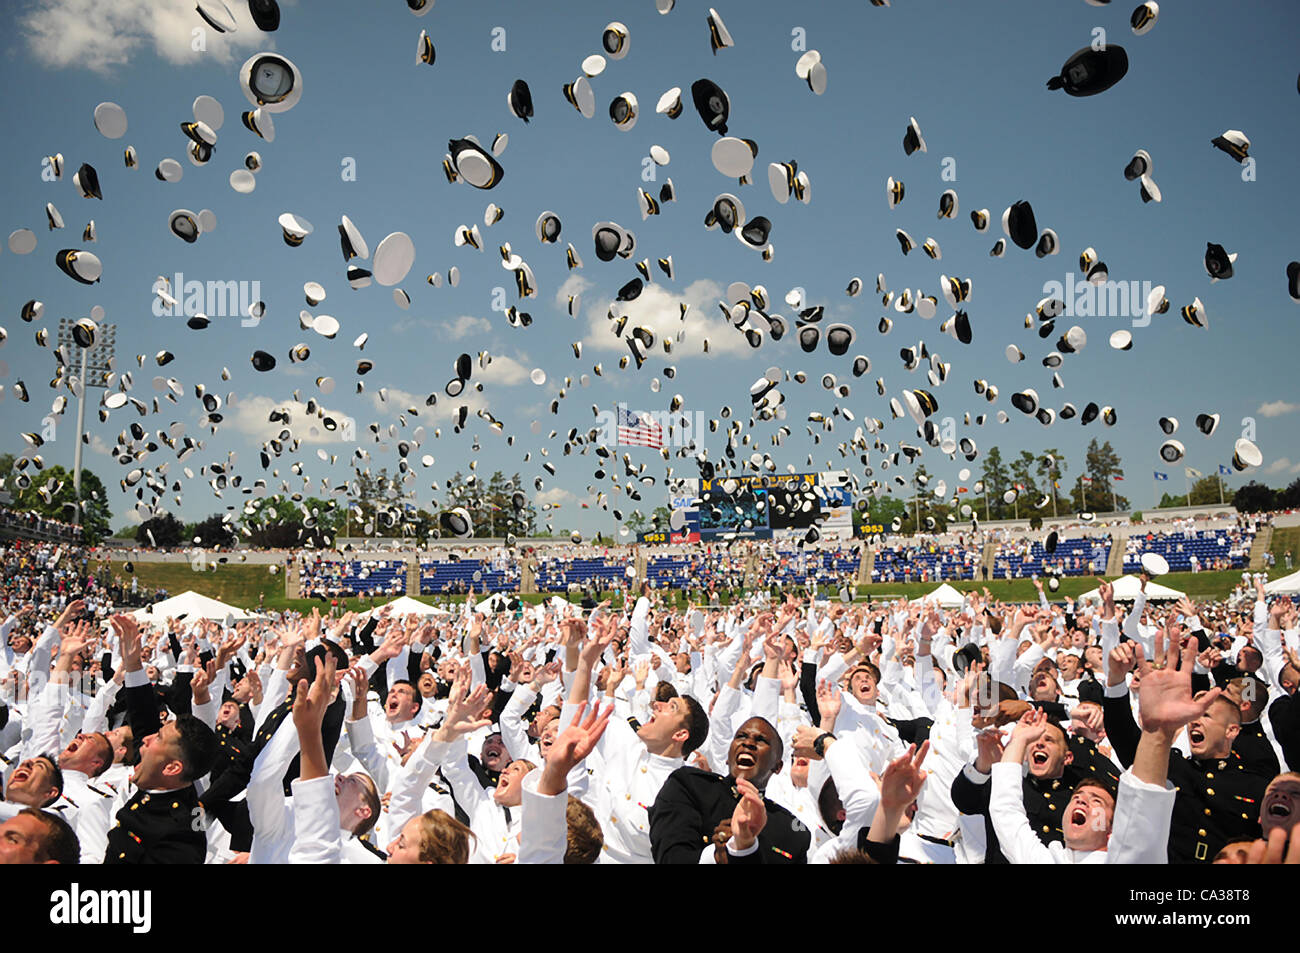 Sailors toss their hats in the air to mark the official closing of the 2012 US Naval Academy graduation and commissioning ceremony May 29, 2012 in Annapolis, MD. Stock Photo